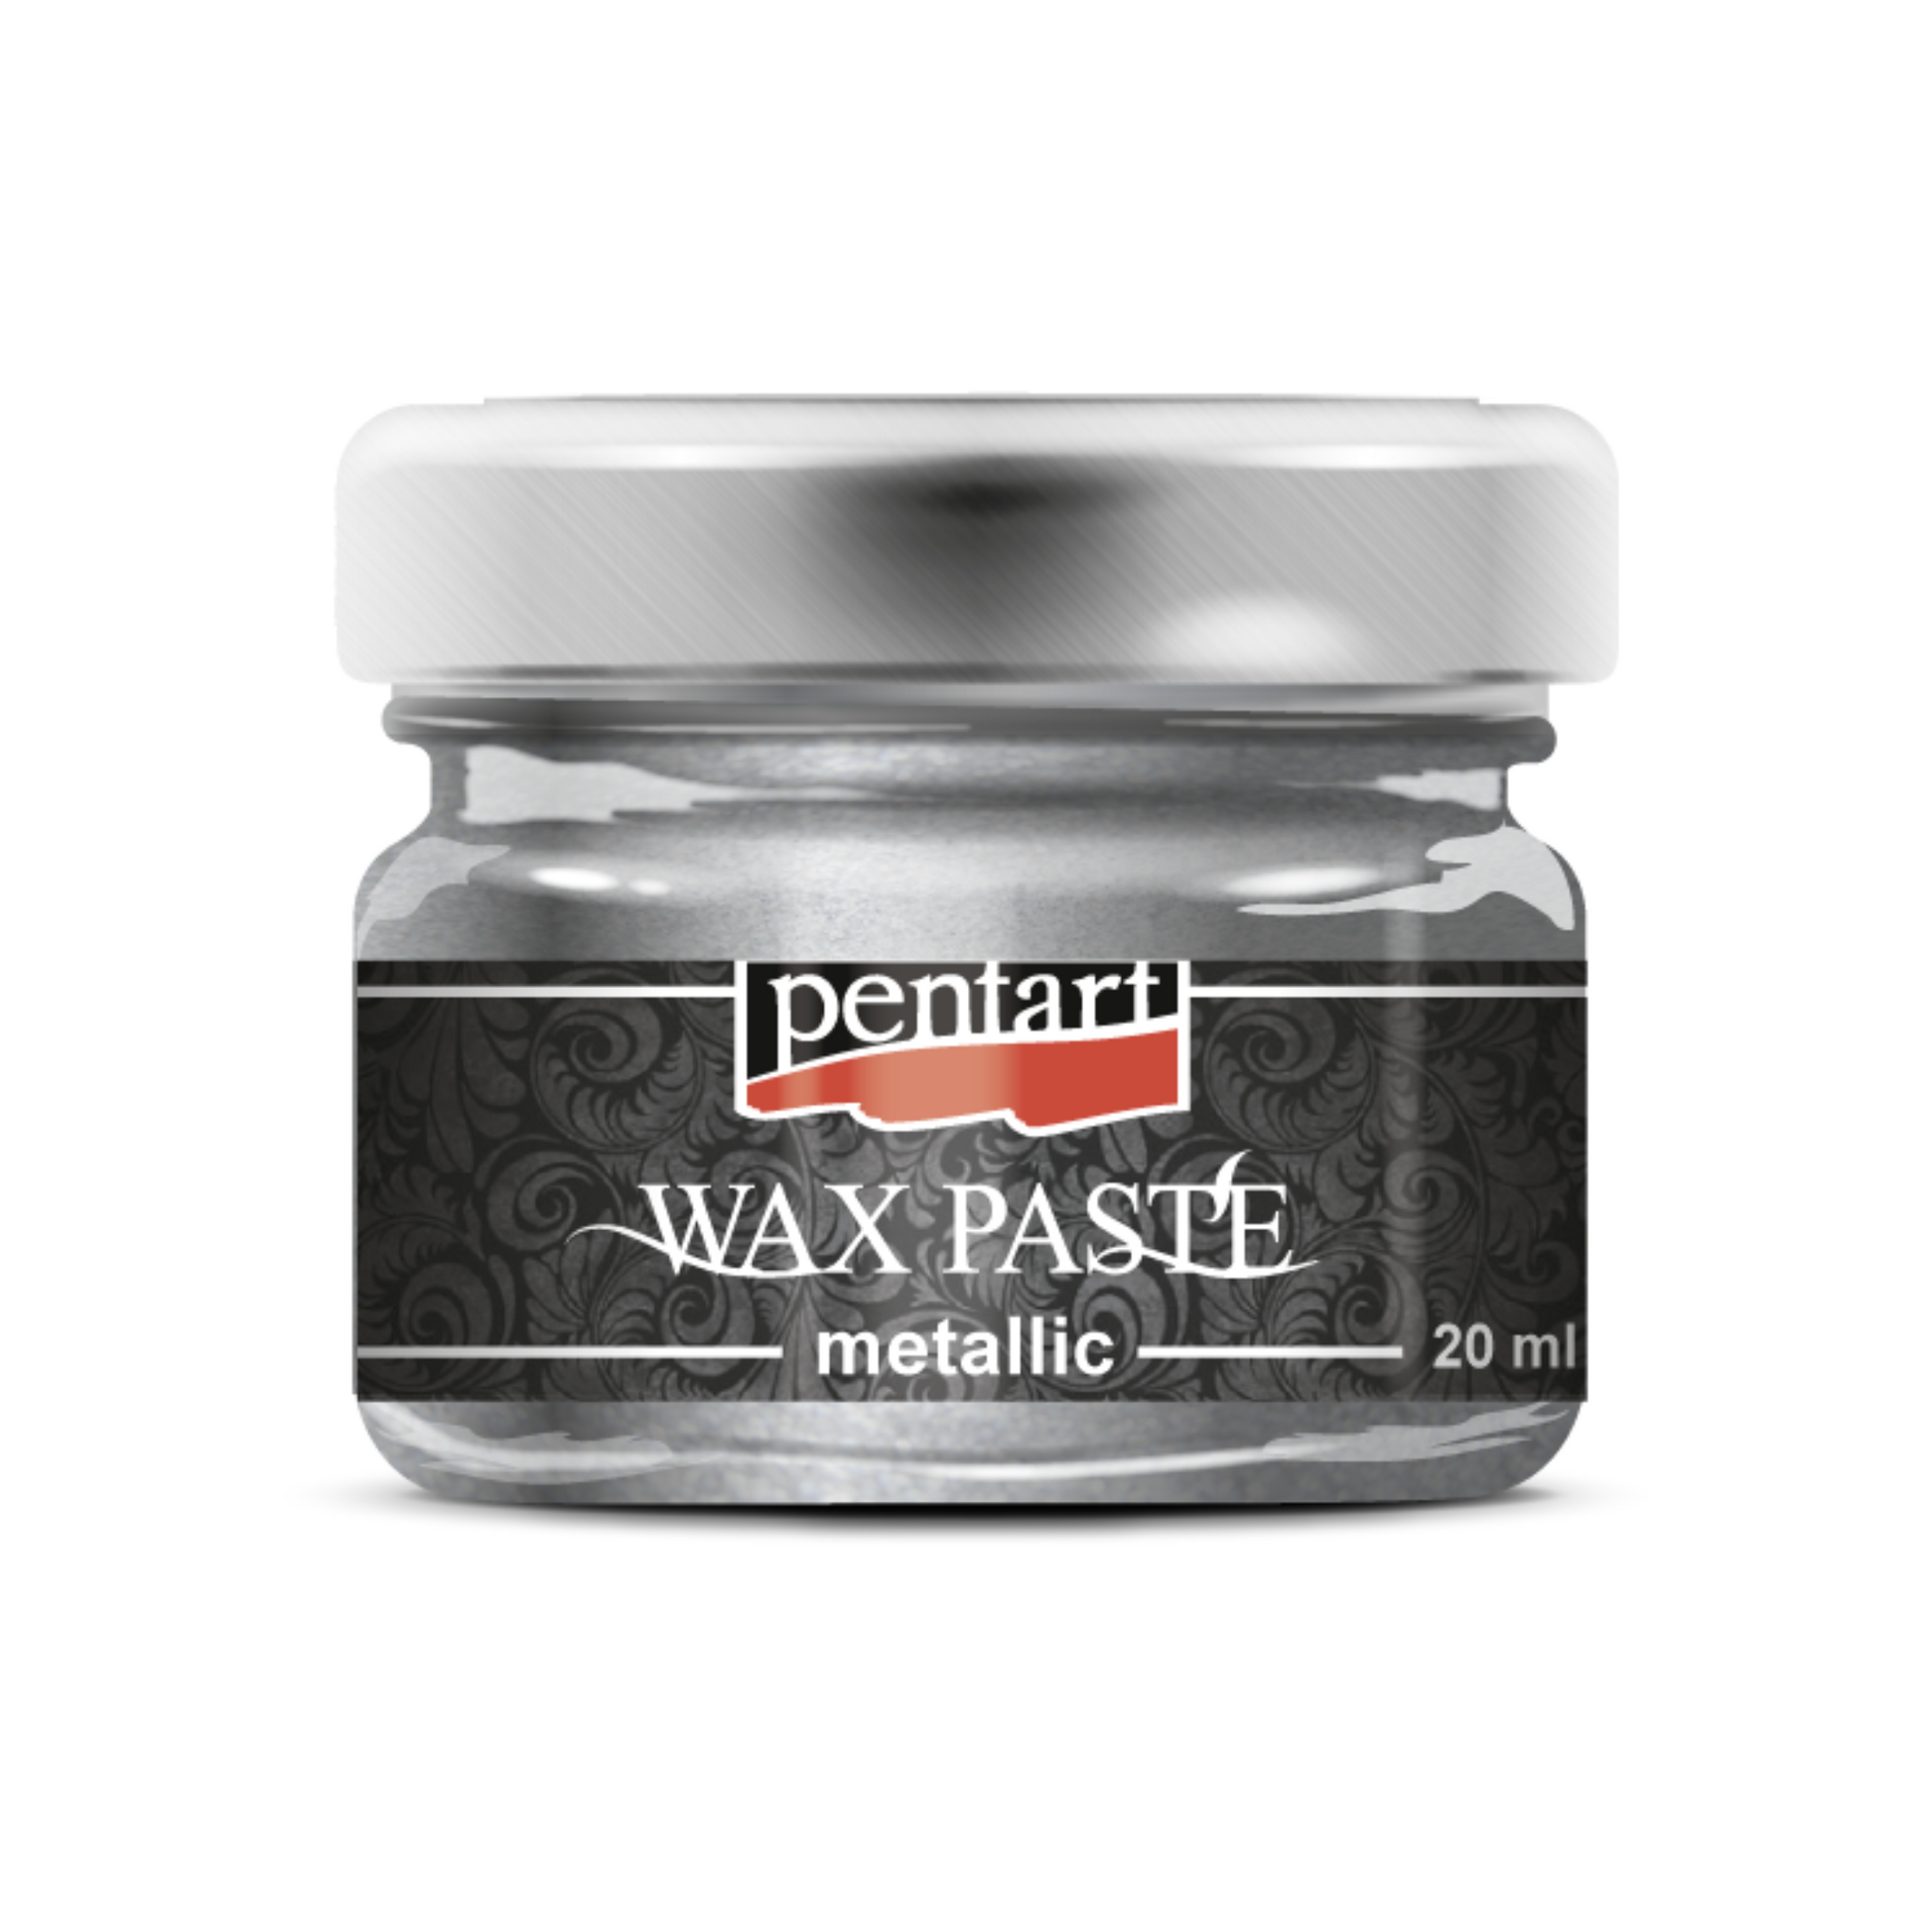 Wax Paste Metallic- Silver 20 ml by Pentart available at Milton's Daughter